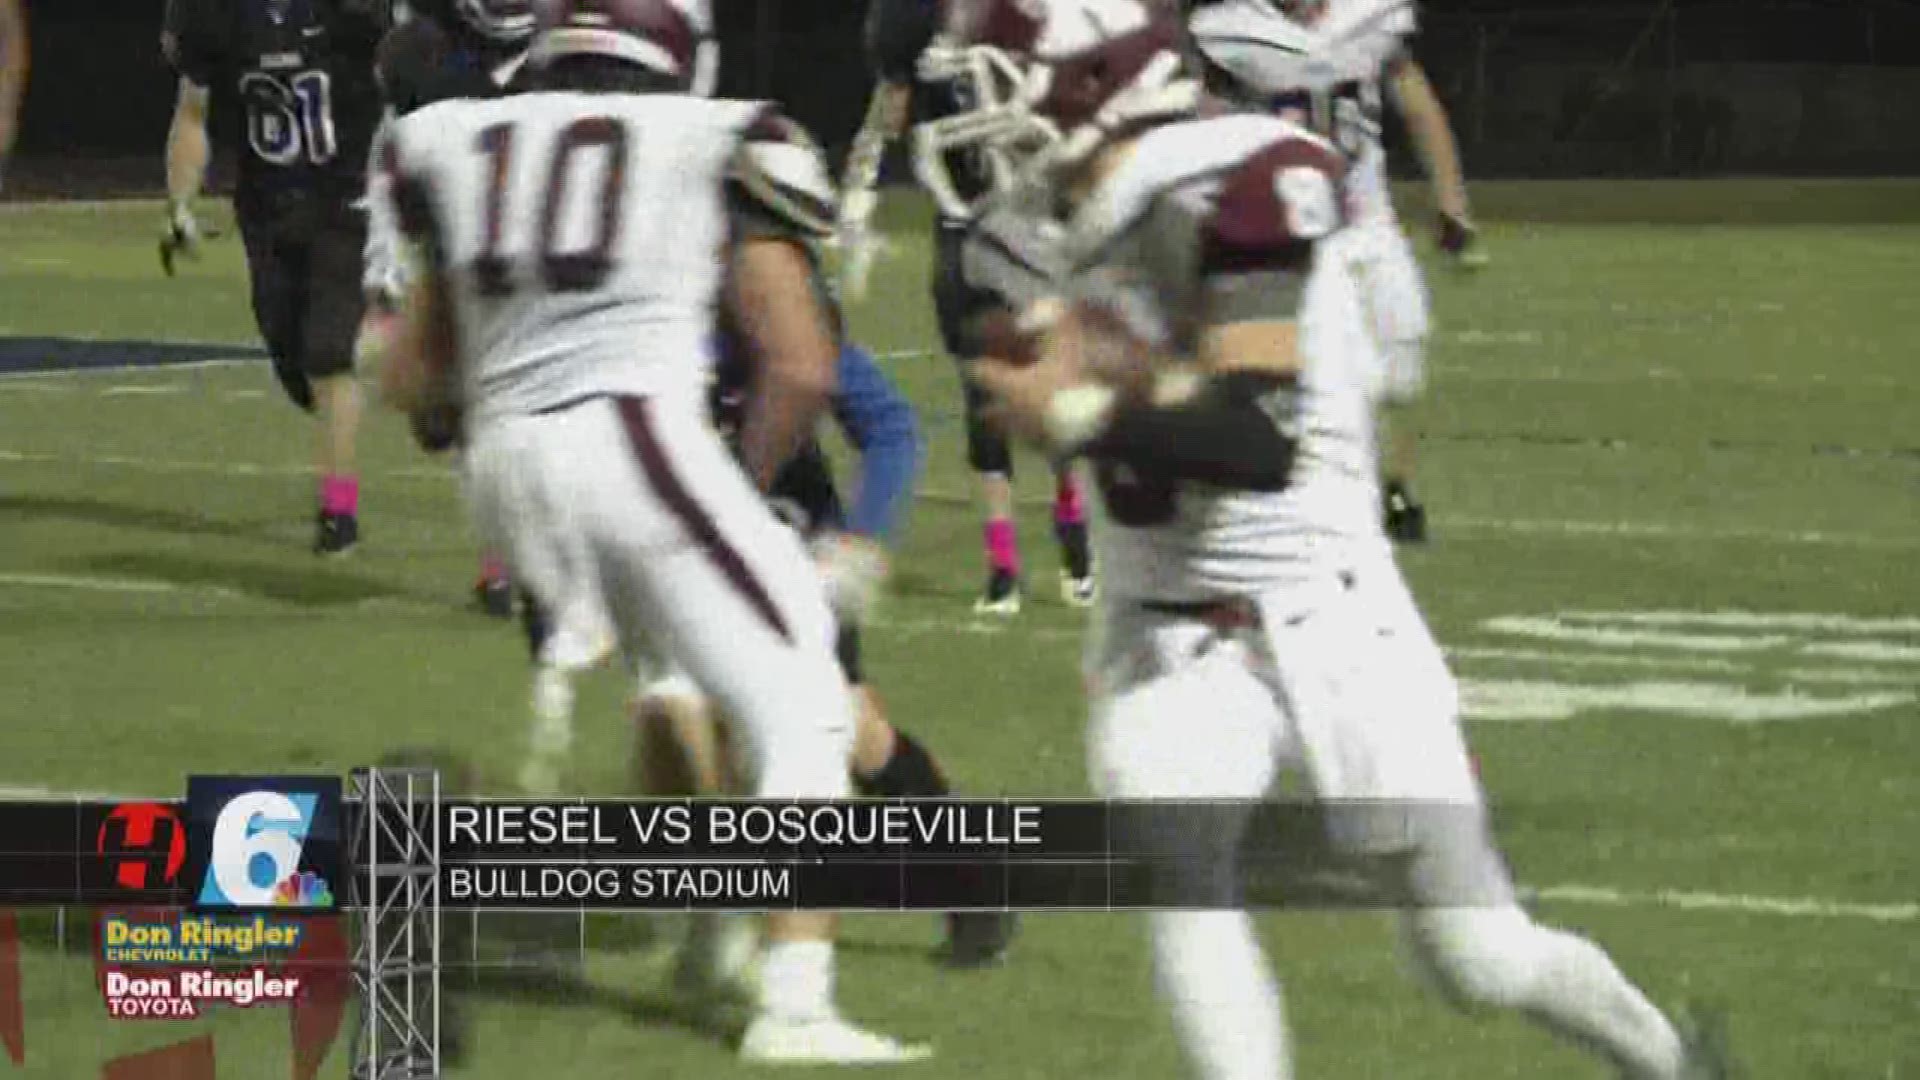 Riesel vs Bosqueville highlights